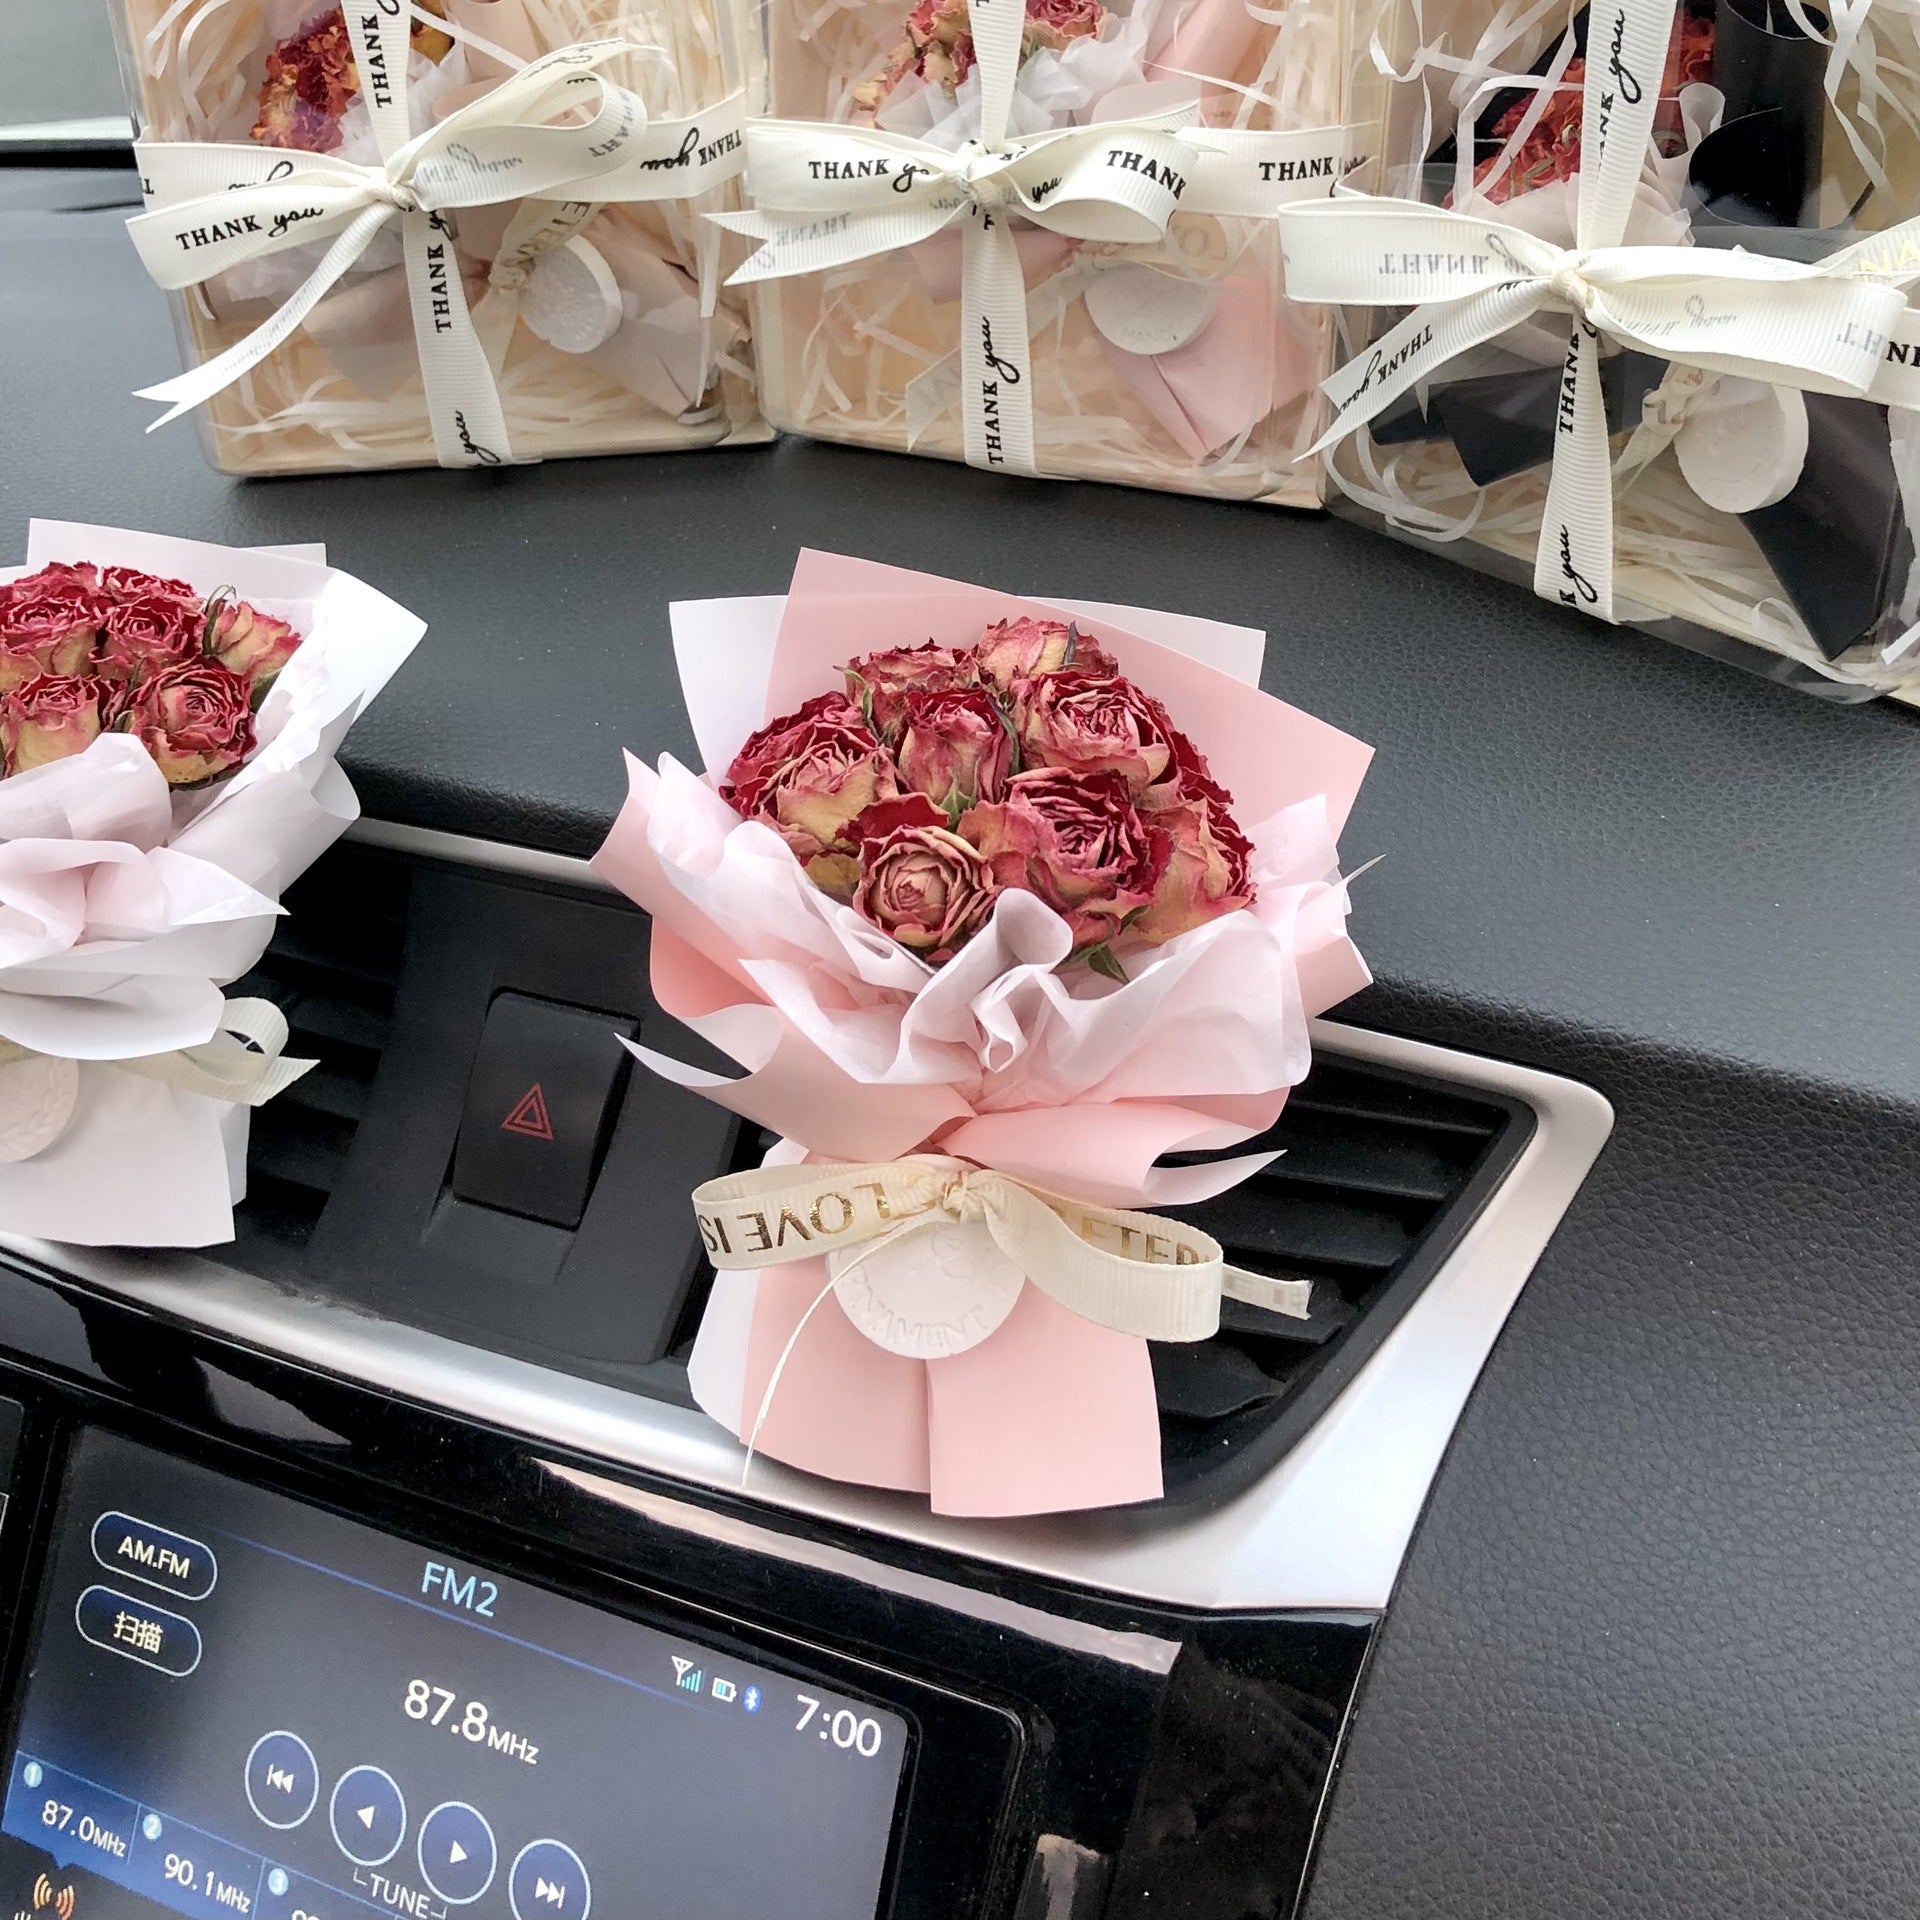  "Elevate your drive with our Tiny Bouquet Car Vent – a charming floral touch on-the-go!"